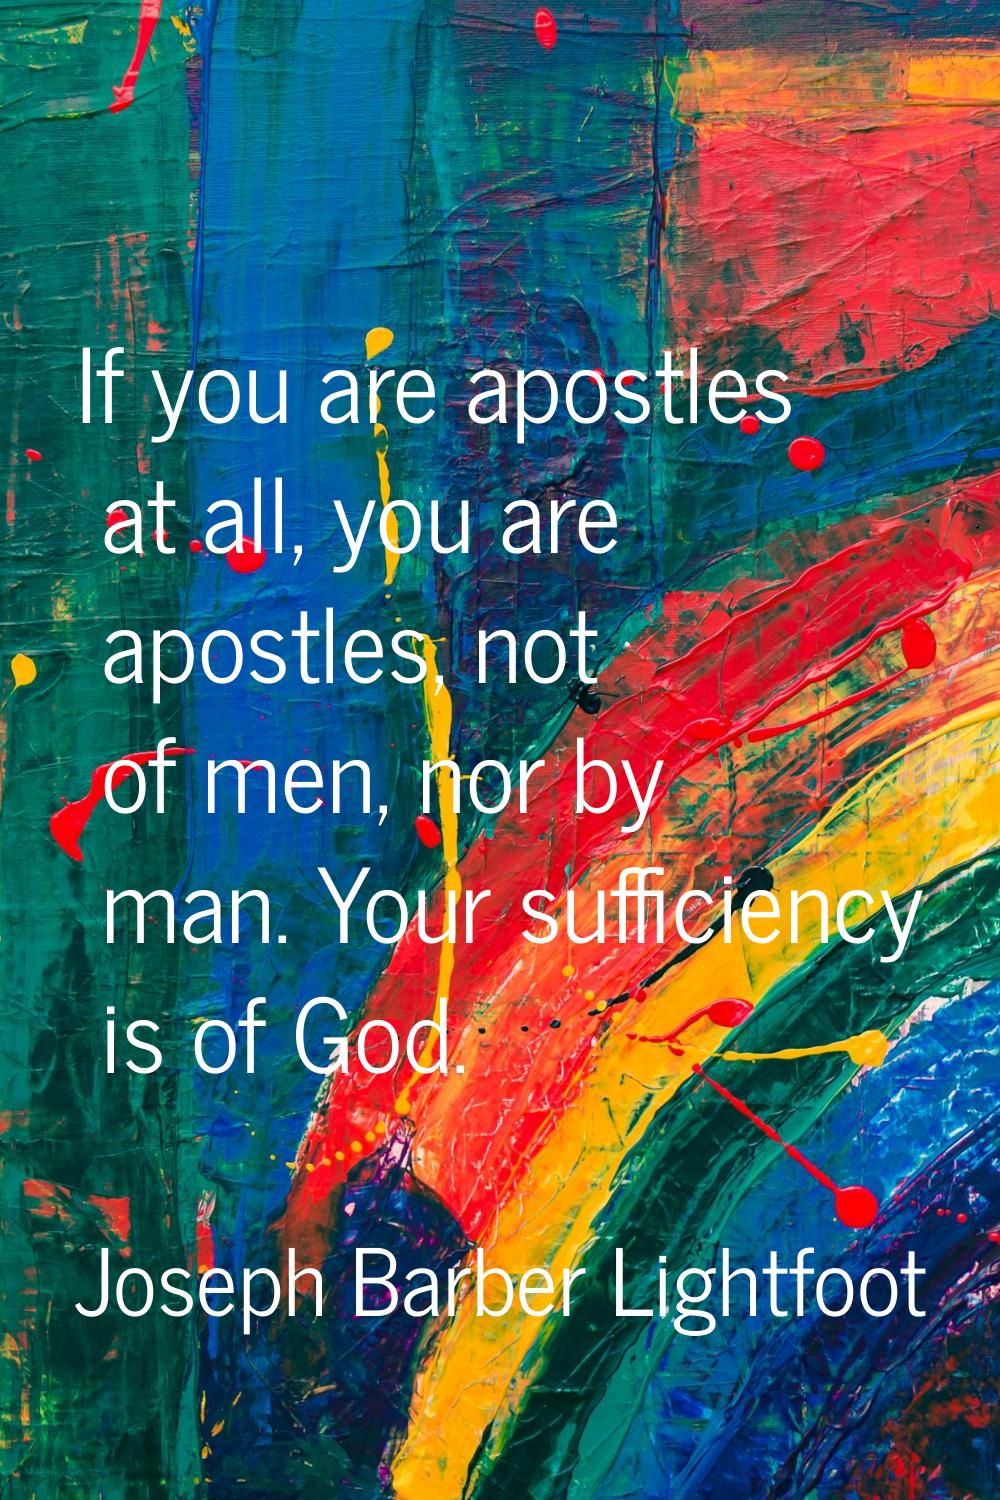 If you are apostles at all, you are apostles, not of men, nor by man. Your sufficiency is of God.